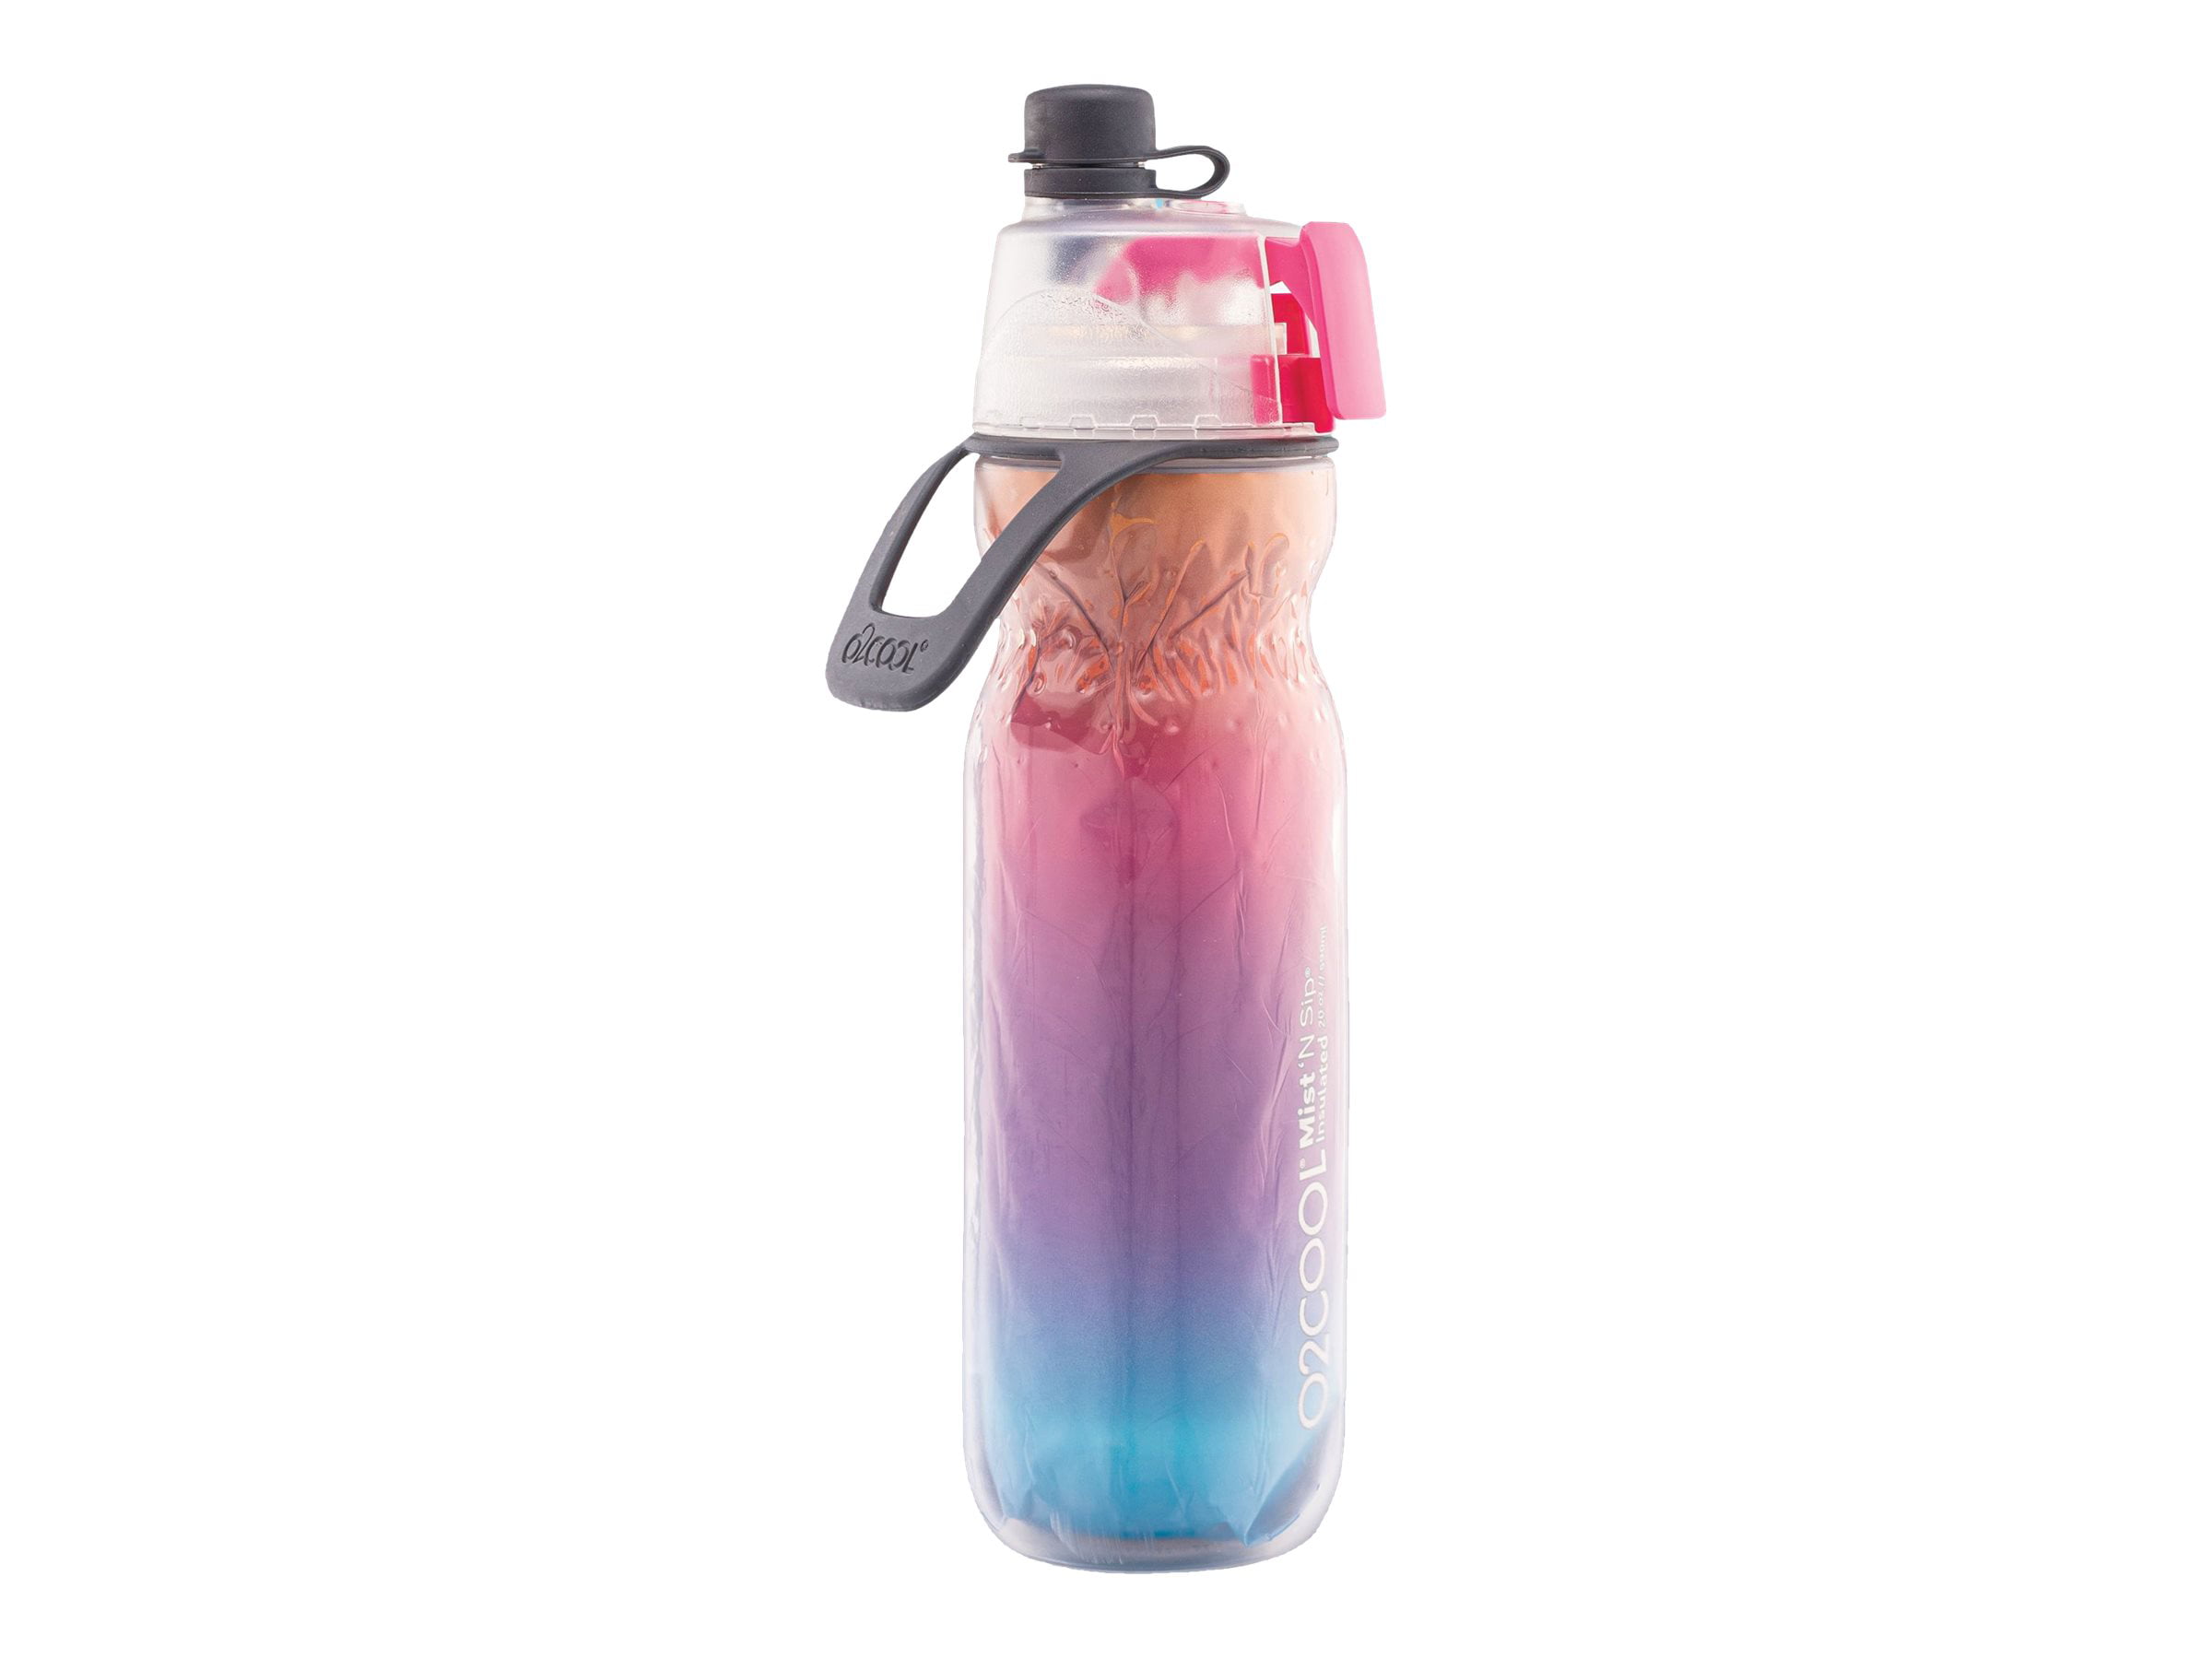 Yoga Mint O2COOL Mist 'N Sip Misting Water Bottle 2-in-1 Mist And Sip Function With No Leak Pull Top Spout 